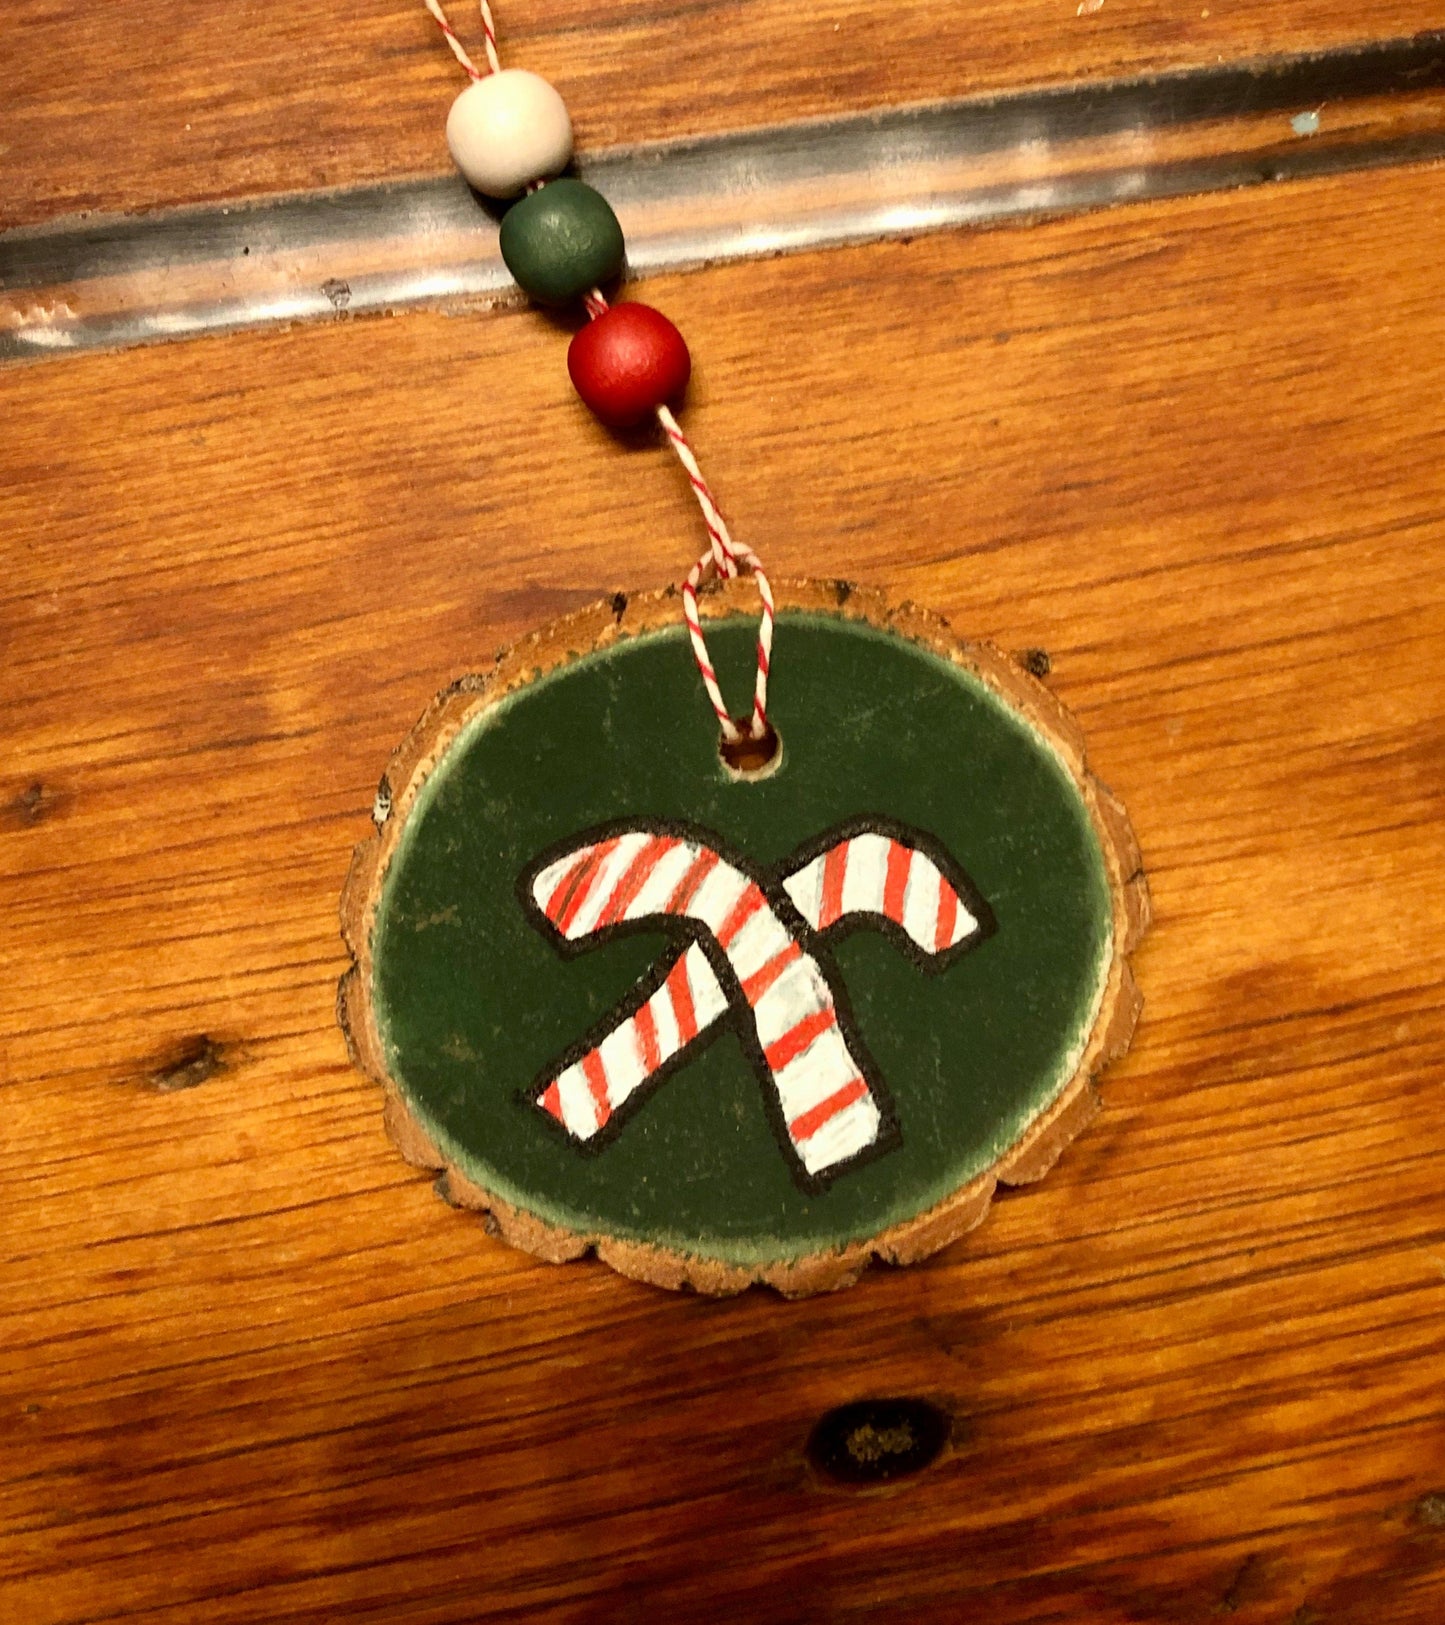 Candy canes Ornaments For Your Tree- Handmade, one-of-a-kind Sassafras Originals